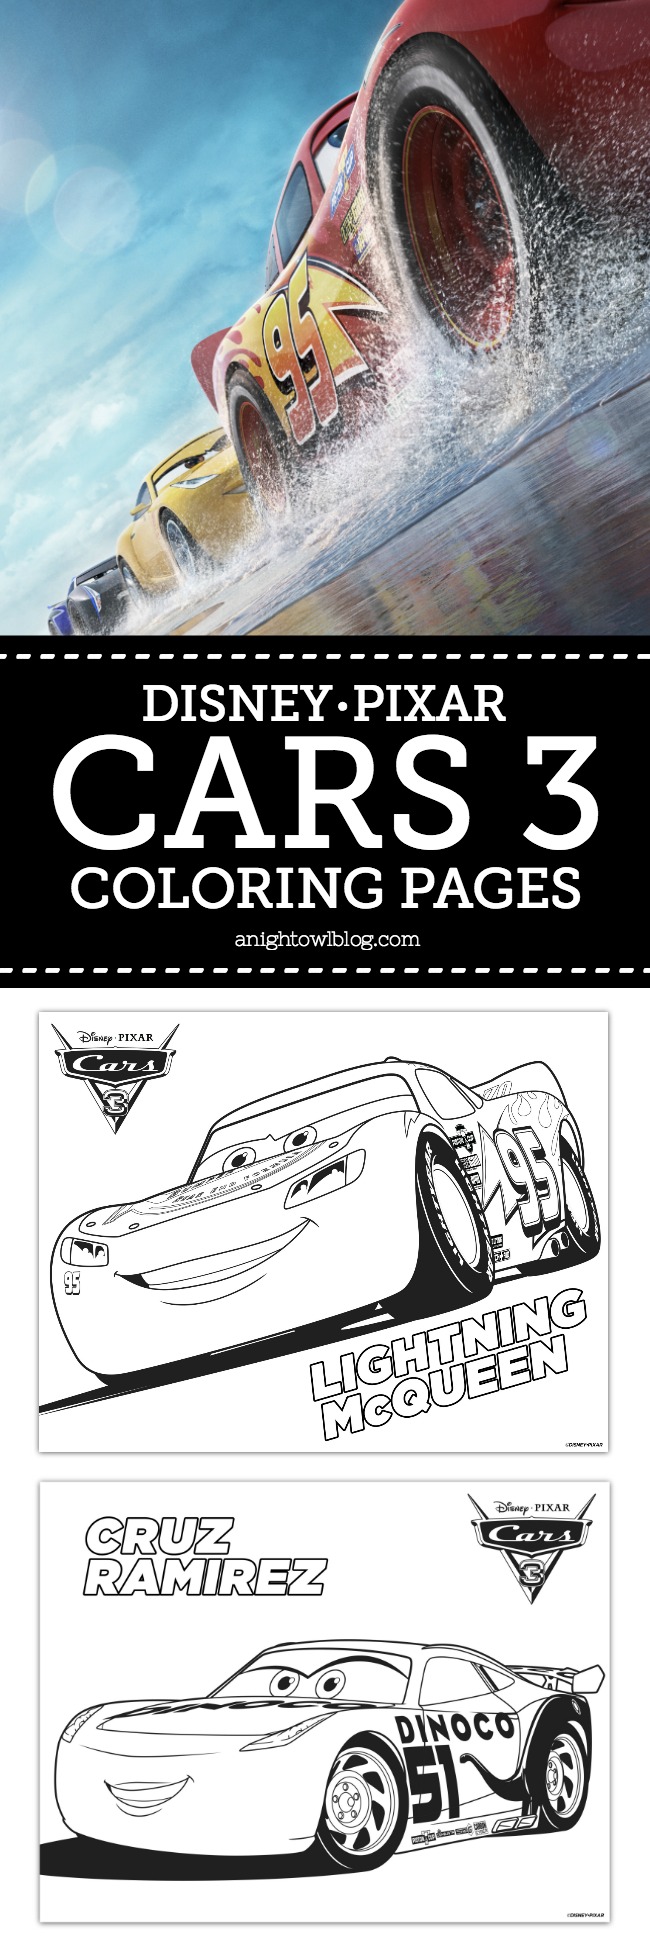 Disney Pixar Cars 3 Coloring Pages - A Night Owl Blog